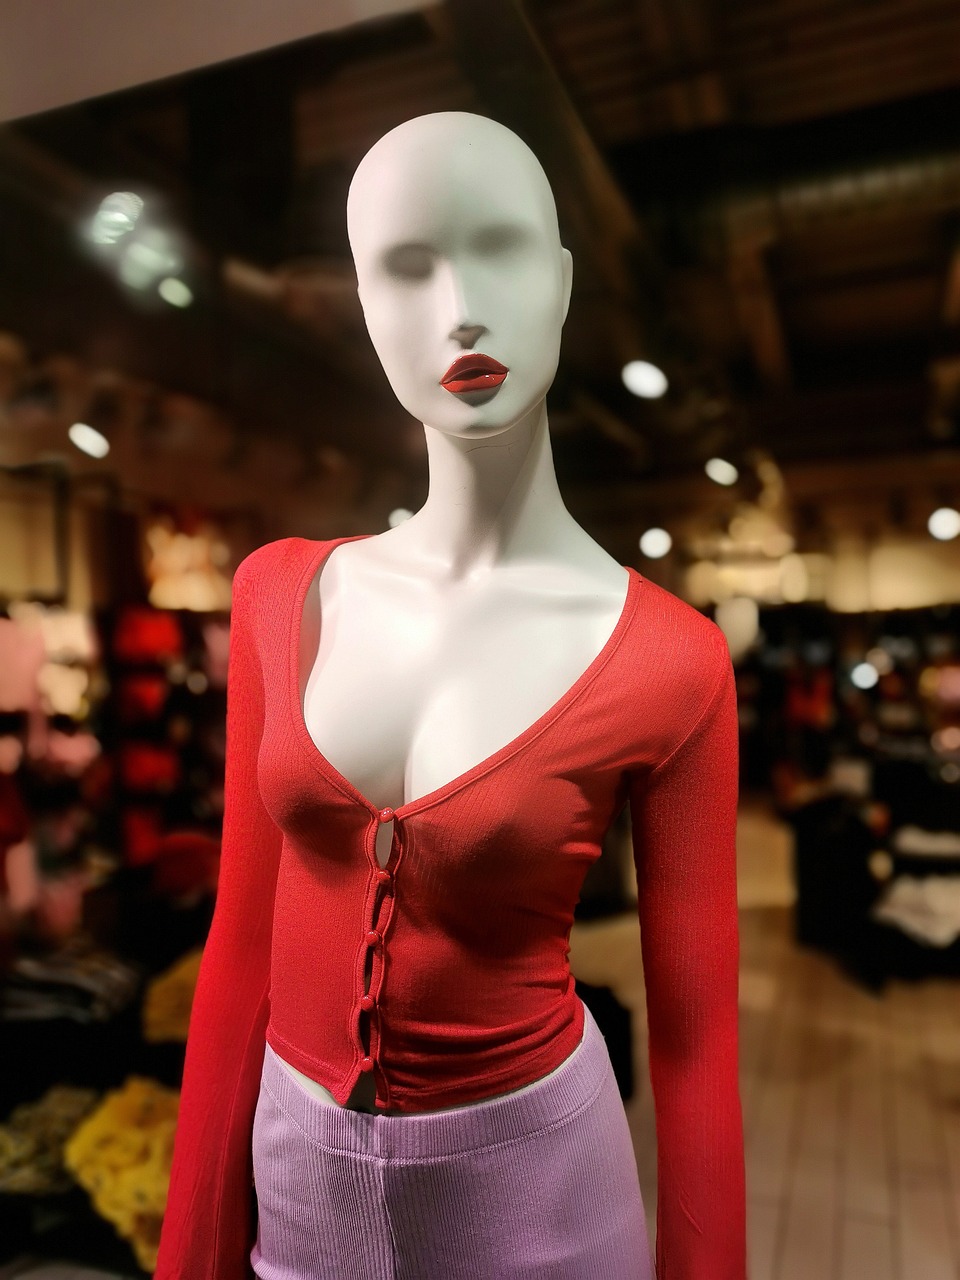 a mannequin wearing a red top in a store, by Arthur Sarkissian, trending on pexels, figuration libre, breasts covered and sfw, smooth white tight clothes suit, beautiful shape of face and body, unusual composition